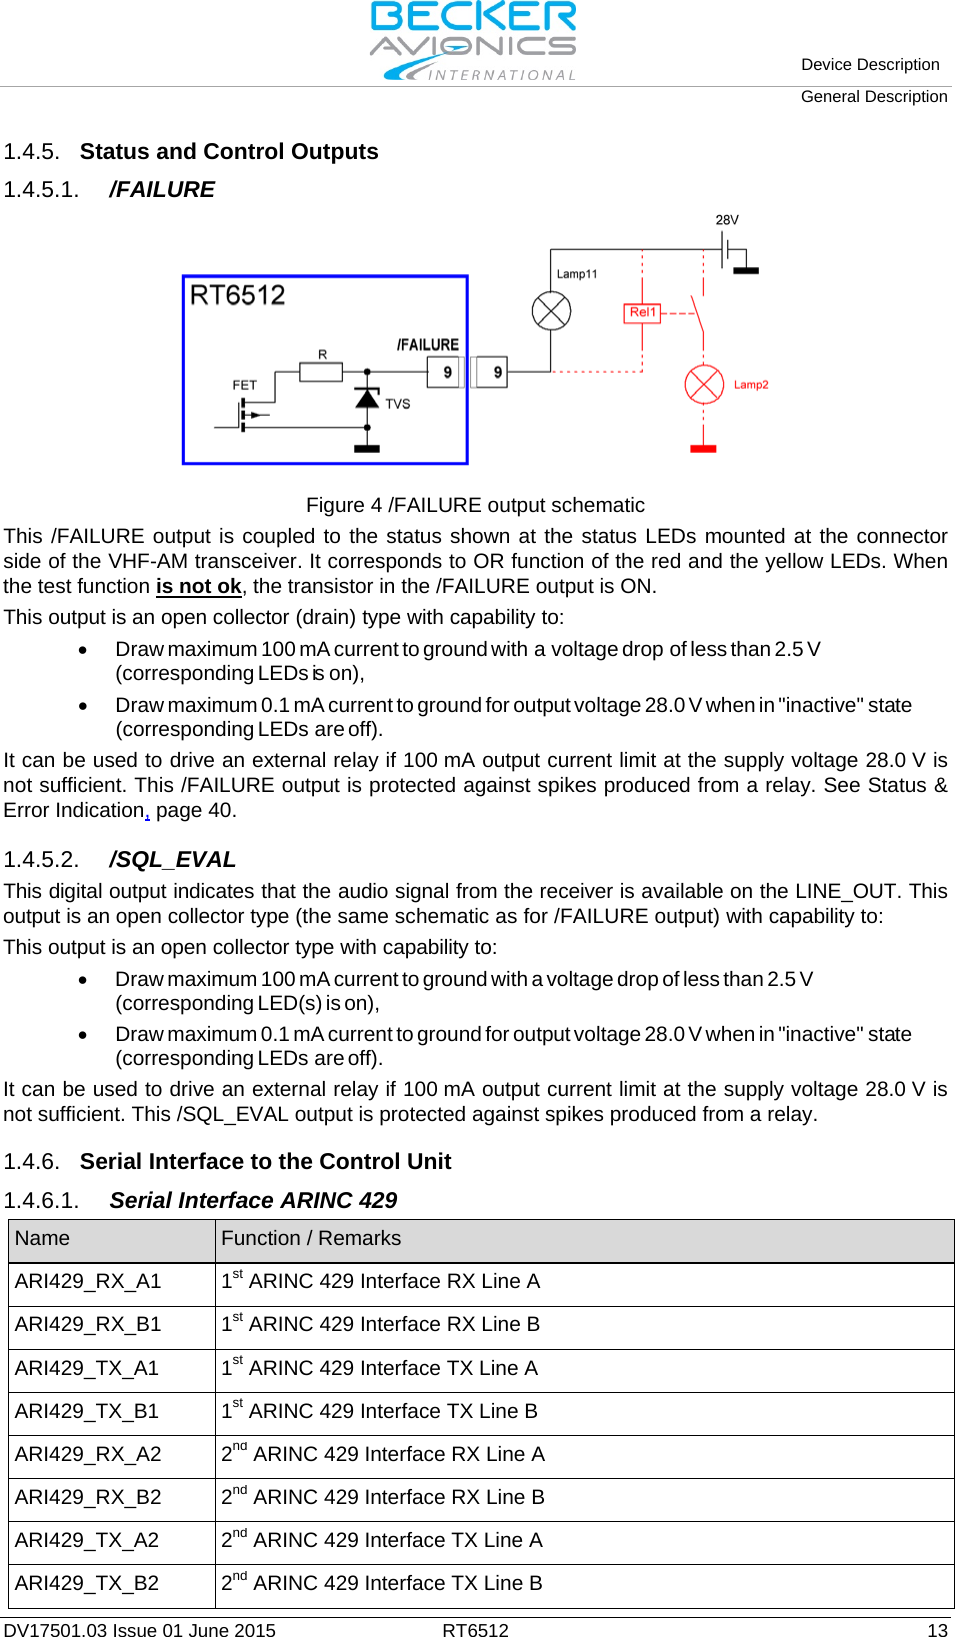   Device Description General Description  DV17501.03 Issue 01 June 2015 RT6512 13 1.4.5. Status and Control Outputs 1.4.5.1. /FAILURE  Figure 4 /FAILURE output schematic This /FAILURE output is coupled to the status shown at the status LEDs mounted at the connector side of the VHF-AM transceiver. It corresponds to OR function of the red and the yellow LEDs. When the test function is not ok, the transistor in the /FAILURE output is ON. This output is an open collector (drain) type with capability to: •  Draw maximum 100 mA current to ground with a voltage drop of less than 2.5 V (corresponding LEDs is  on), •  Draw maximum 0.1 mA current to ground for output voltage 28.0 V when in &quot;inactive&quot; state (corresponding LEDs are off).  It can be used to drive an external relay if 100 mA output current limit at the supply voltage 28.0 V is not sufficient. This /FAILURE output is protected against spikes produced from a relay. See Status &amp; Error Indication, page 40.   1.4.5.2. /SQL_EVAL This digital output indicates that the audio signal from the receiver is available on the LINE_OUT. This output is an open collector type (the same schematic as for /FAILURE output) with capability to: This output is an open collector type with capability to: •  Draw maximum 100 mA current to ground with a voltage drop of less than 2.5 V (corresponding LED(s) is on), •  Draw maximum 0.1 mA current to ground for output voltage 28.0 V when in &quot;inactive&quot; state (corresponding LEDs are off).  It can be used to drive an external relay if 100 mA output current limit at the supply voltage 28.0 V is not sufficient. This /SQL_EVAL output is protected against spikes produced from a relay.  1.4.6. Serial Interface to the Control Unit 1.4.6.1. Serial Interface ARINC 429 Name Function / Remarks ARI429_RX_A1 1st ARINC 429 Interface RX Line A ARI429_RX_B1 1st ARINC 429 Interface RX Line B ARI429_TX_A1 1st ARINC 429 Interface TX Line A ARI429_TX_B1 1st ARINC 429 Interface TX Line B ARI429_RX_A2 2nd ARINC 429 Interface RX Line A ARI429_RX_B2 2nd ARINC 429 Interface RX Line B ARI429_TX_A2 2nd ARINC 429 Interface TX Line A ARI429_TX_B2 2nd ARINC 429 Interface TX Line B  